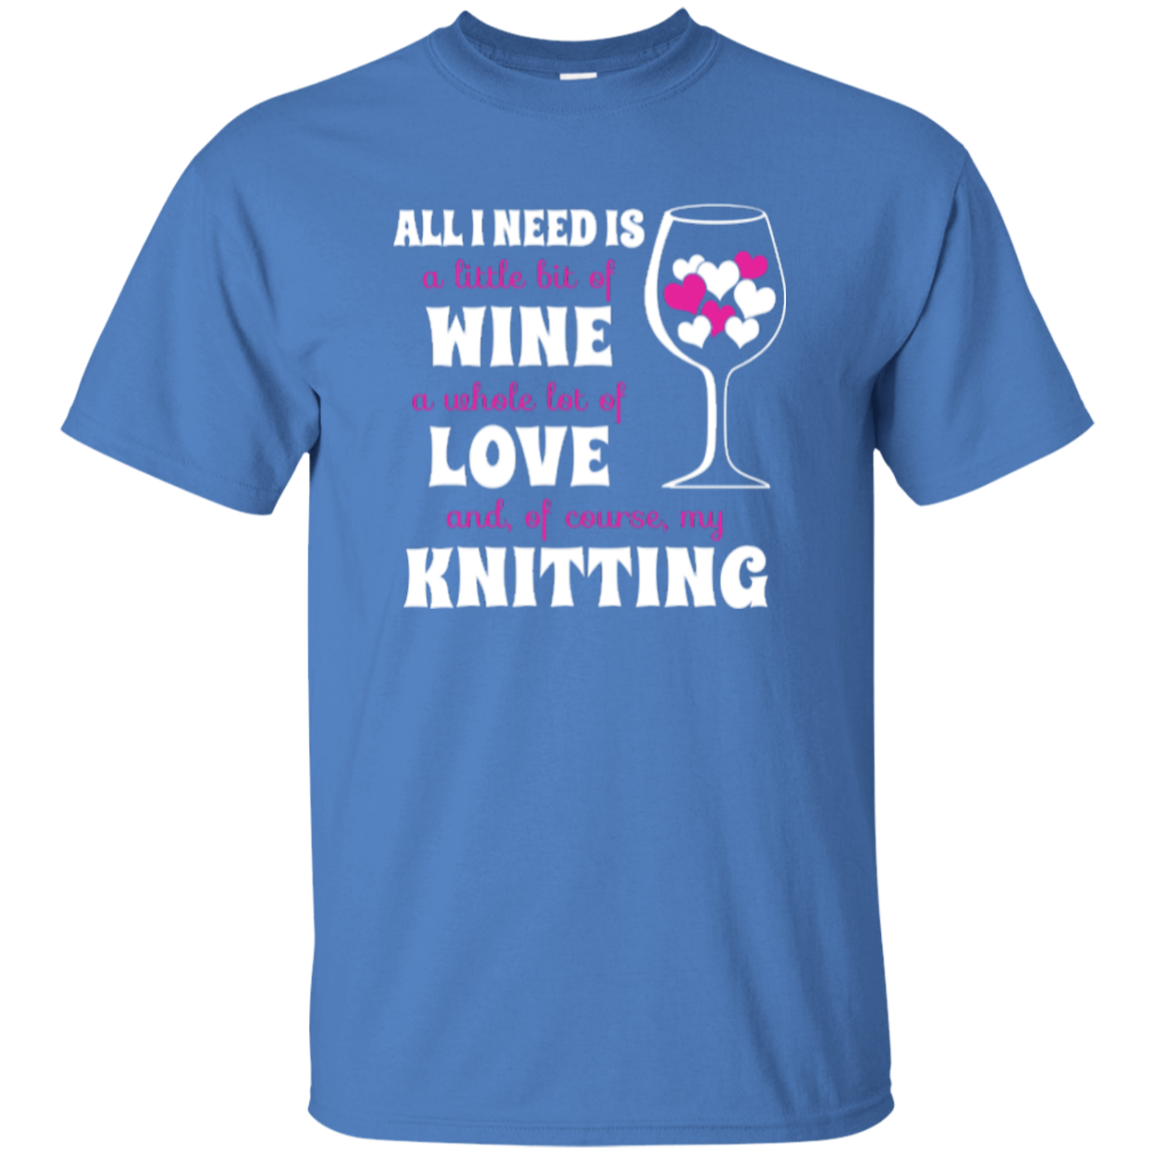 All I Need is Wine-Love-Knitting Custom Ultra Cotton T-Shirt - Crafter4Life - 6